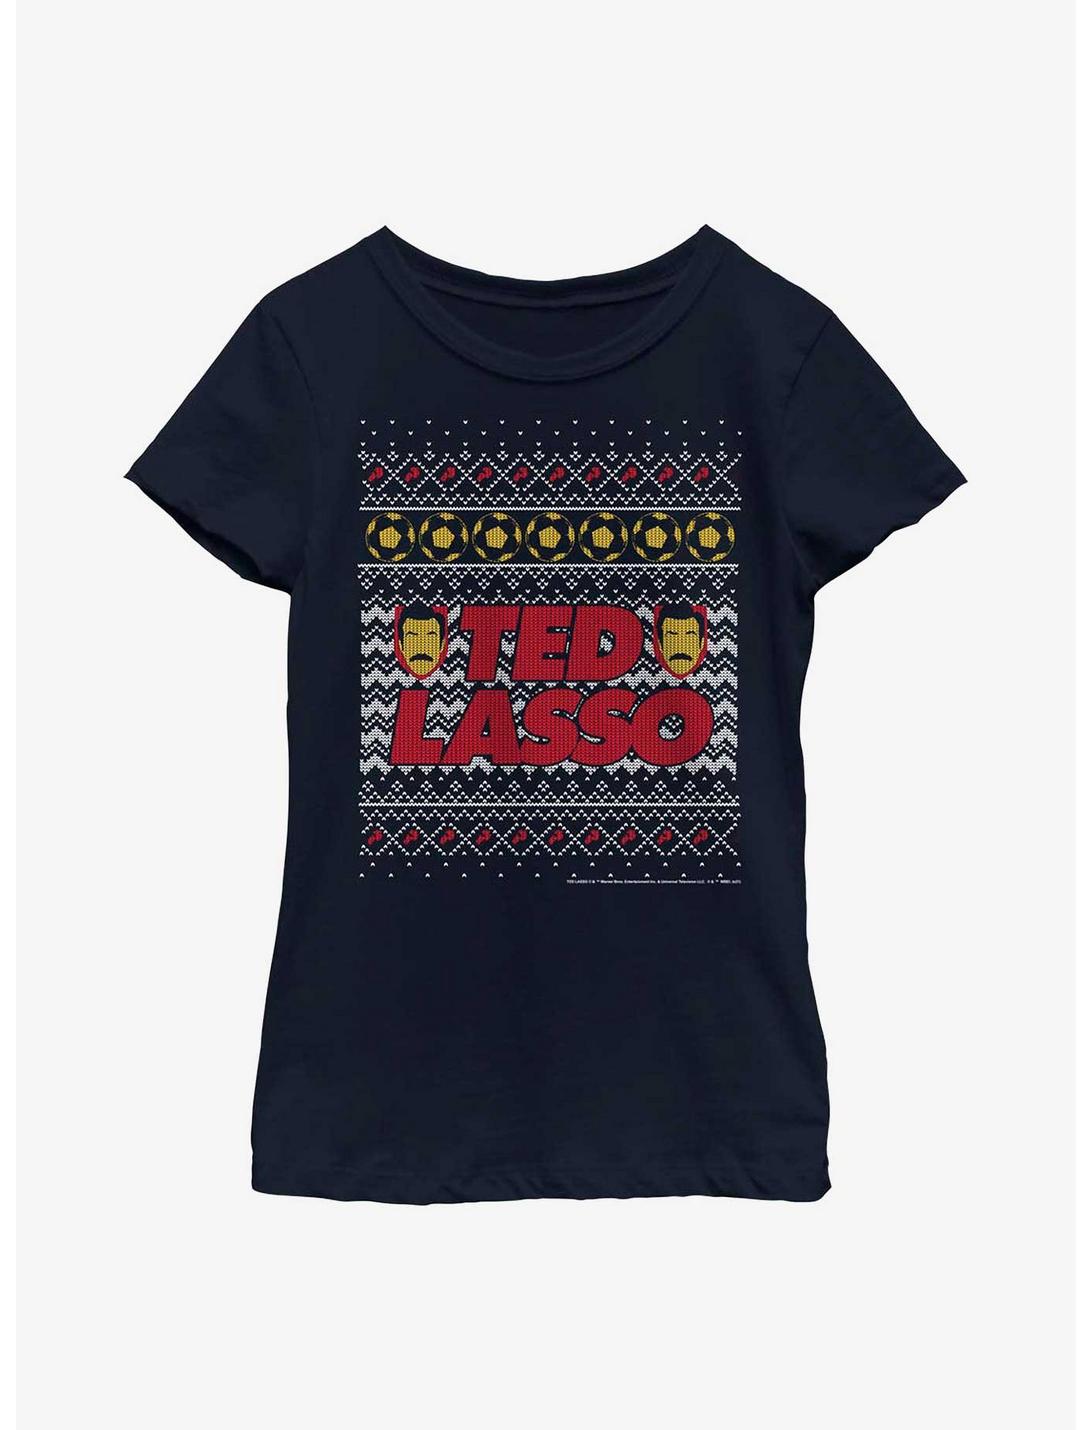 Ted Lasso Ugly Sweater Youth Girls T-Shirt, NAVY, hi-res